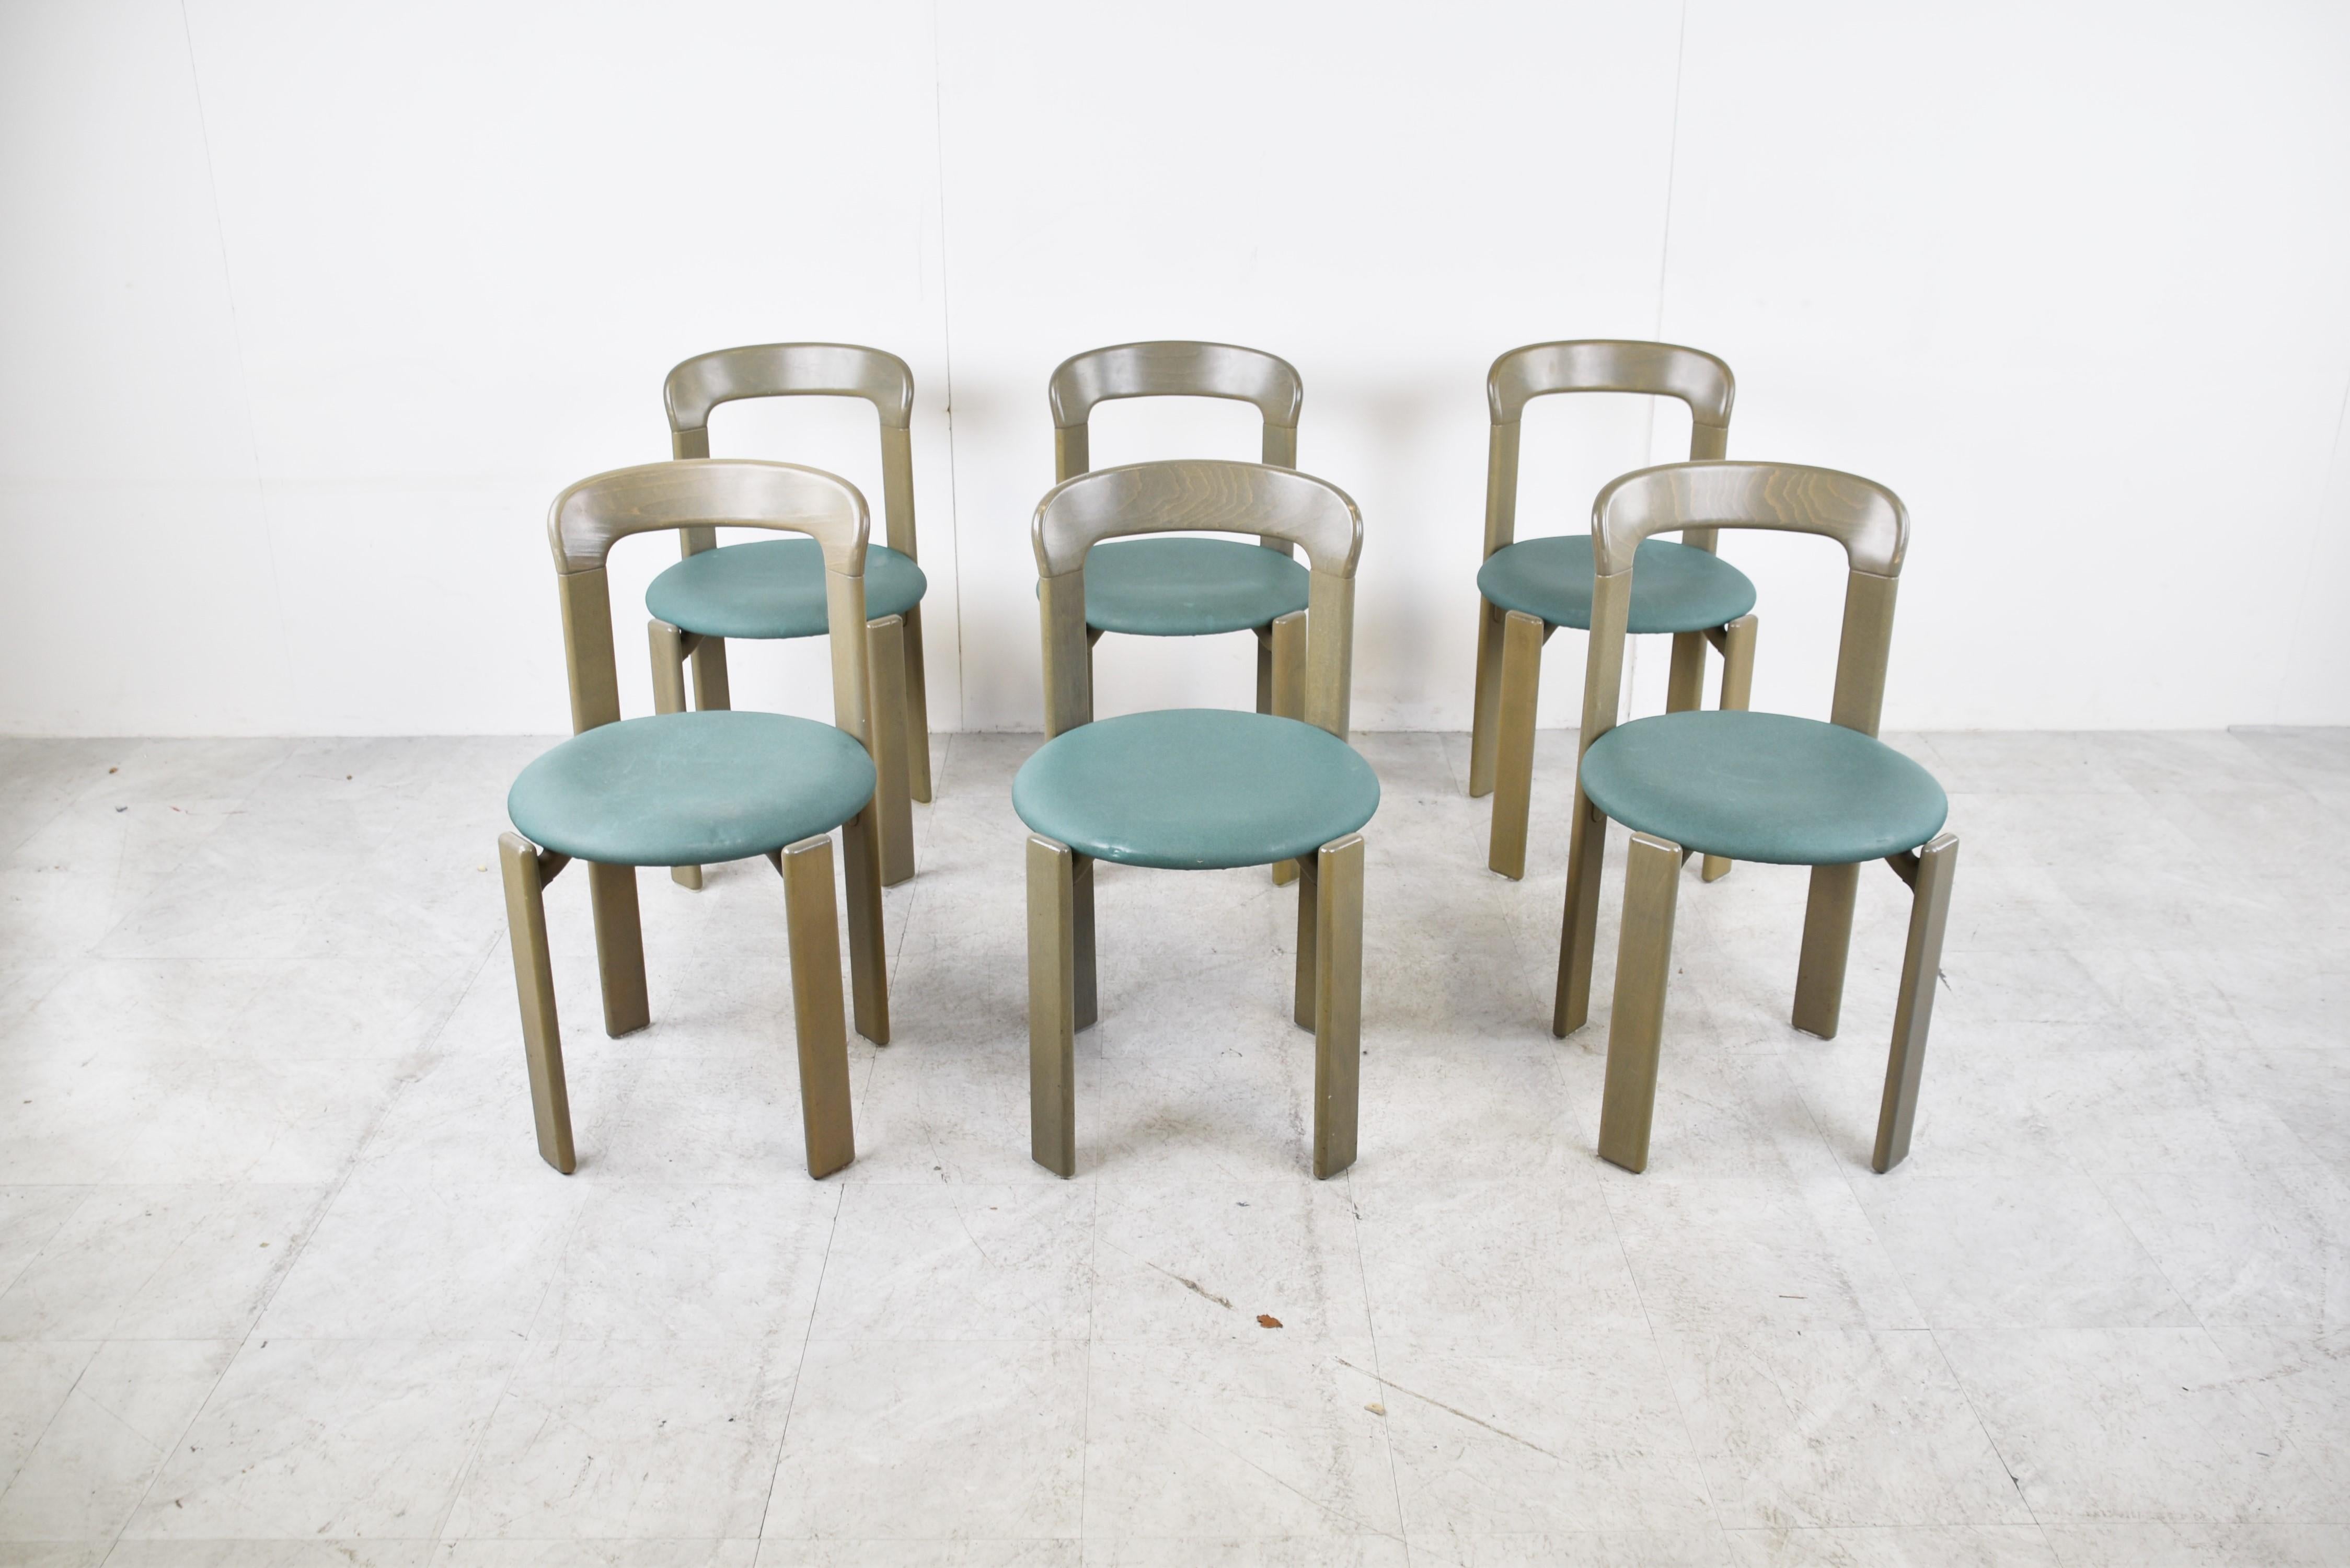 Dining chairs designed by Swiss designer Bruno Rey and produced by Kush & Co.

The chairs have a timeless design and where widely used. They are stackable per 4 pieces.

Good overall condition with normal age related wear. 

1970s -